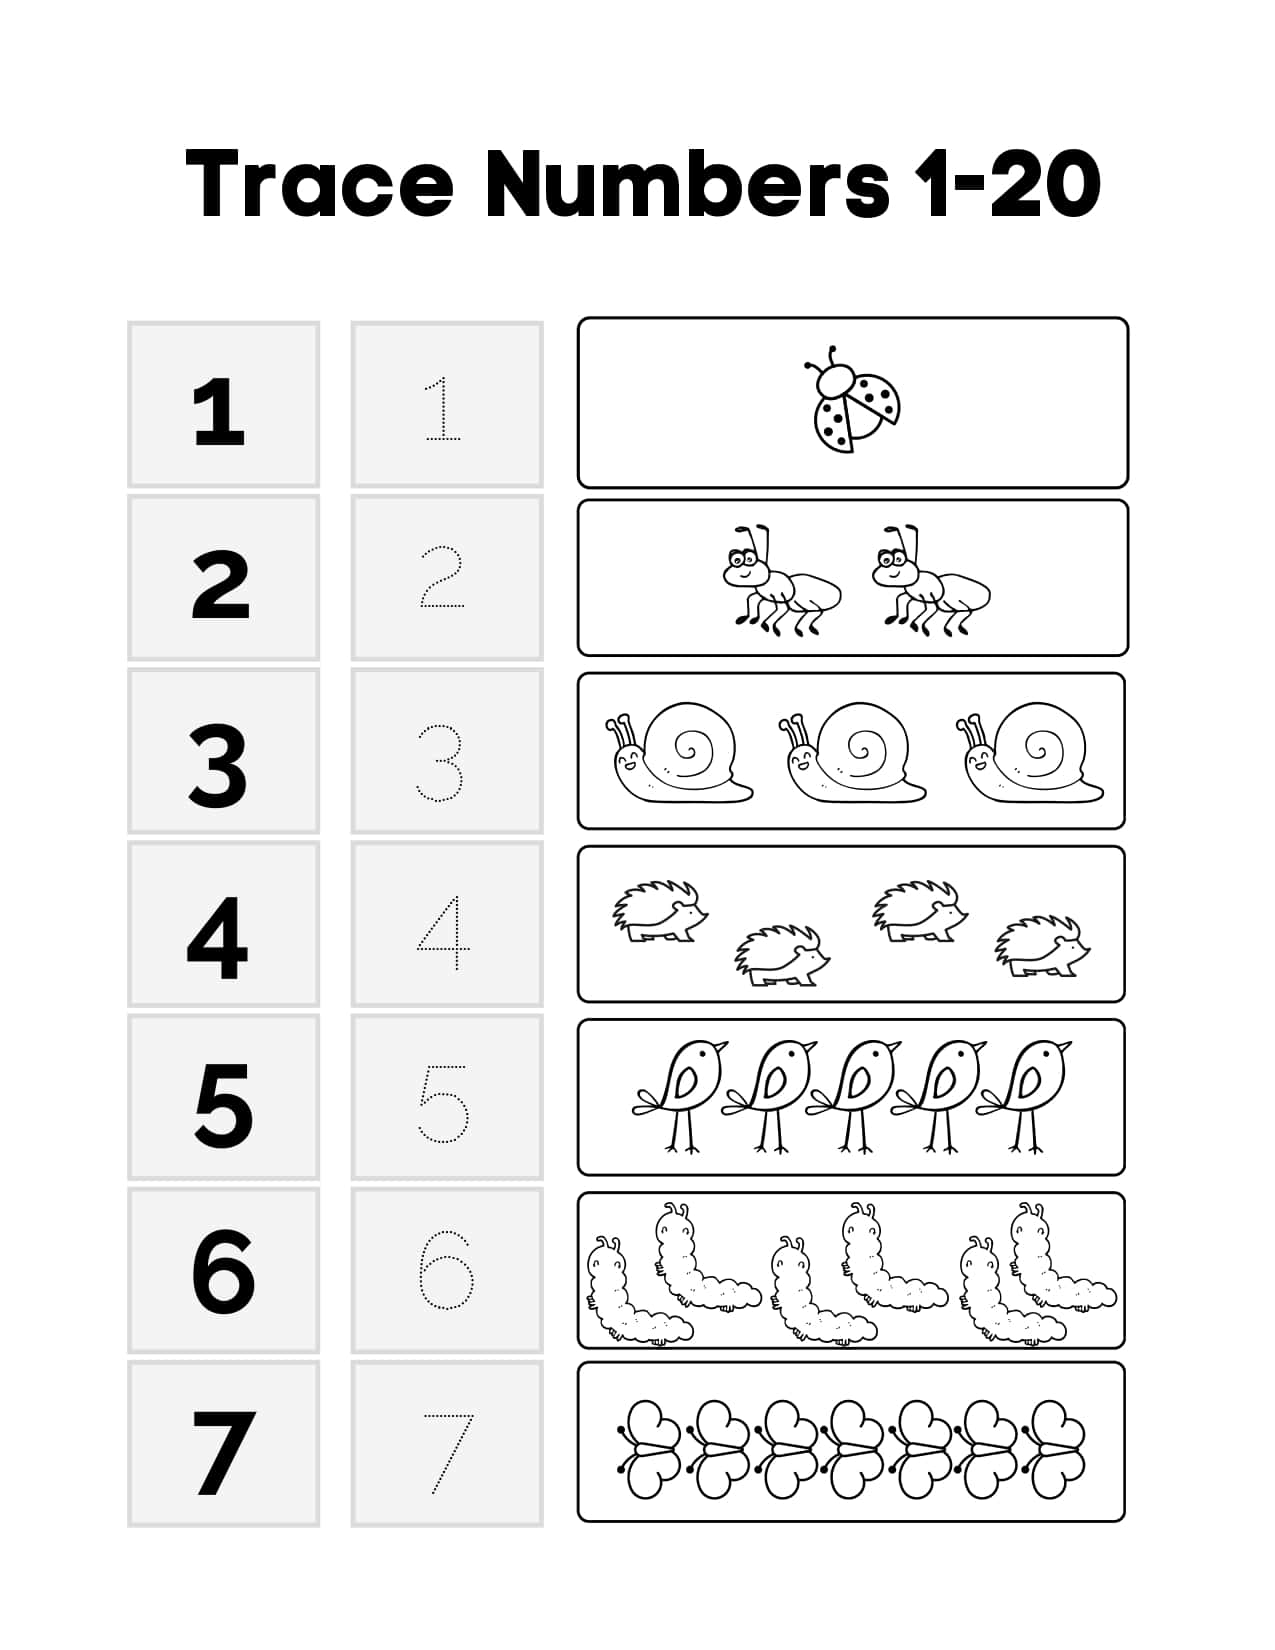 tracing numbers 1-20